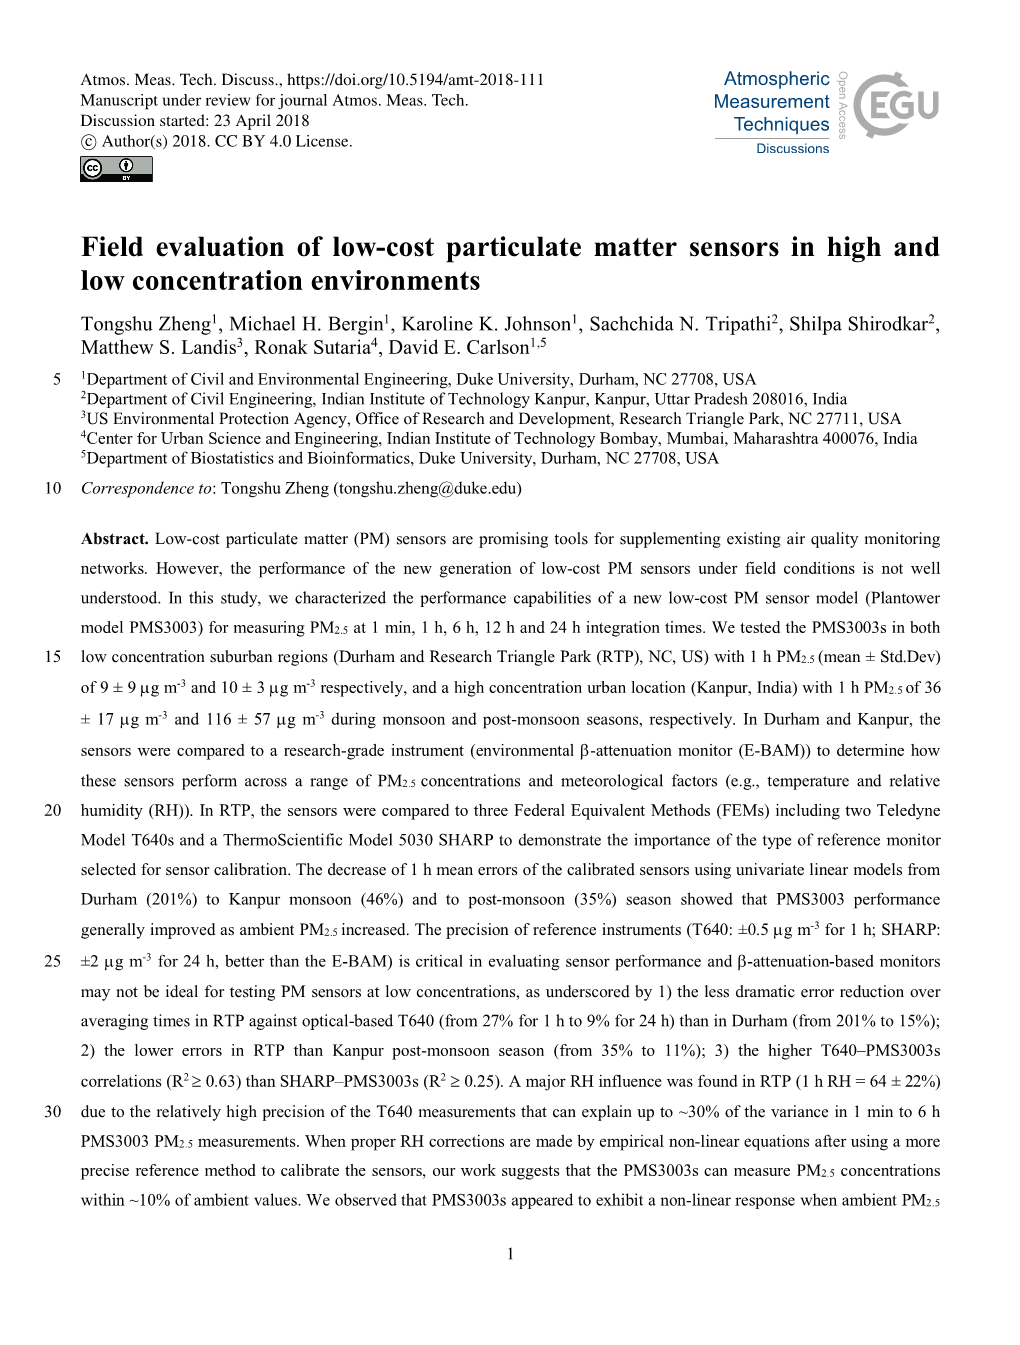 Field Evaluation of Low-Cost Particulate Matter Sensors in High and Low Concentration Environments Tongshu Zheng1, Michael H